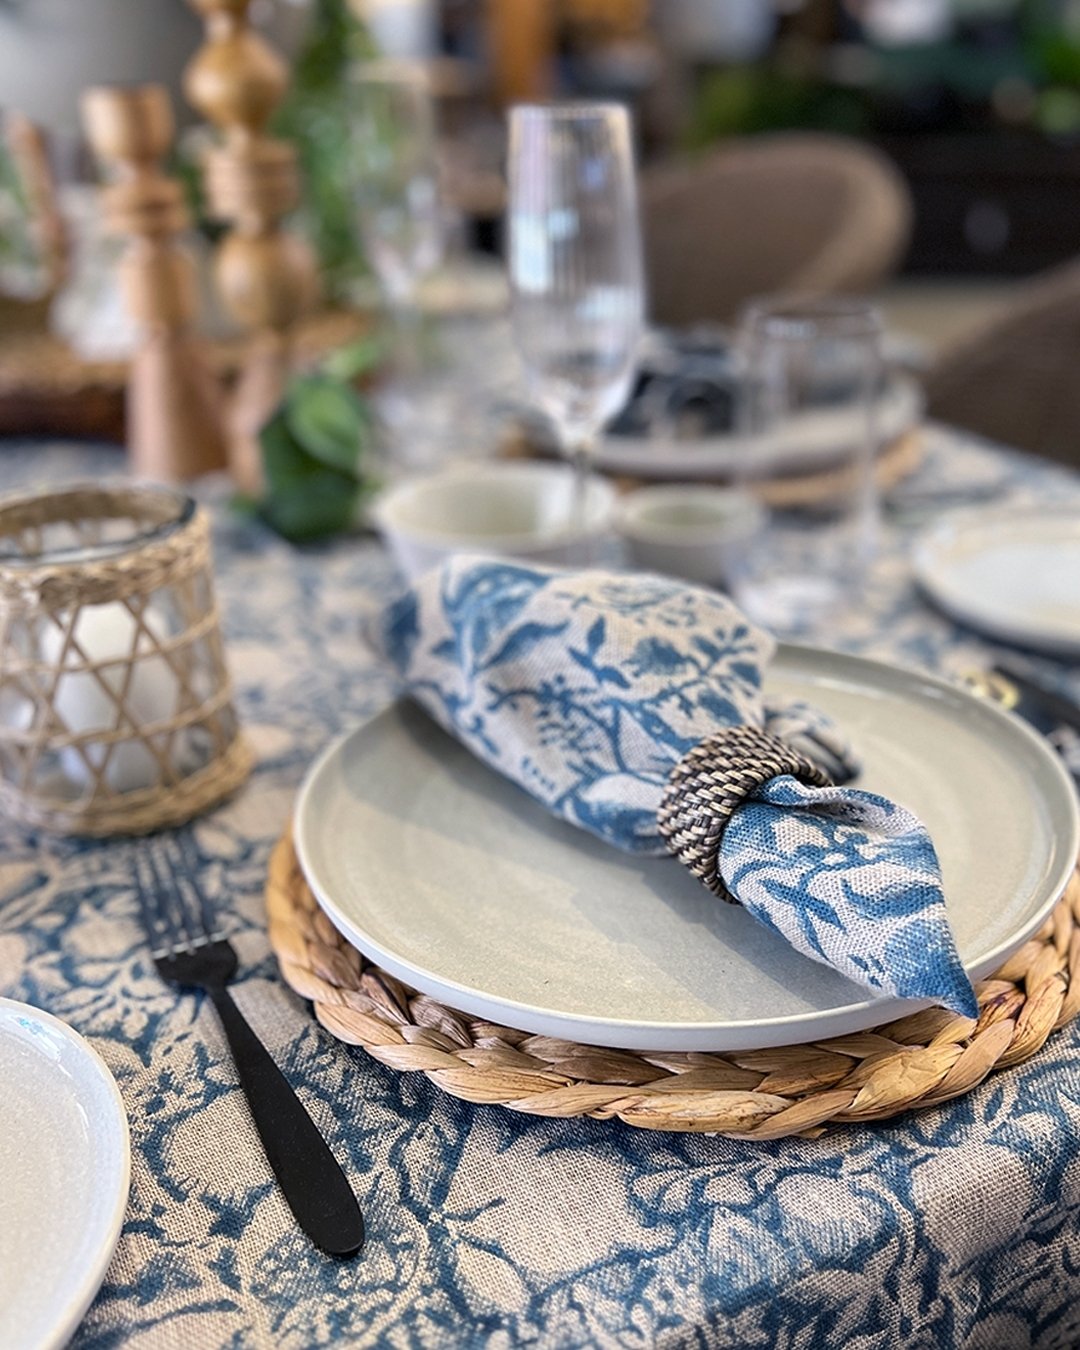 💙 The perfect base for entertaining, the Forage Collection features rich tones in ocean blue, midnight and forest, boasting all-over floral silhouettes.

Explore the full collection today. Link in bio ✧

📸 @homegoodshardware